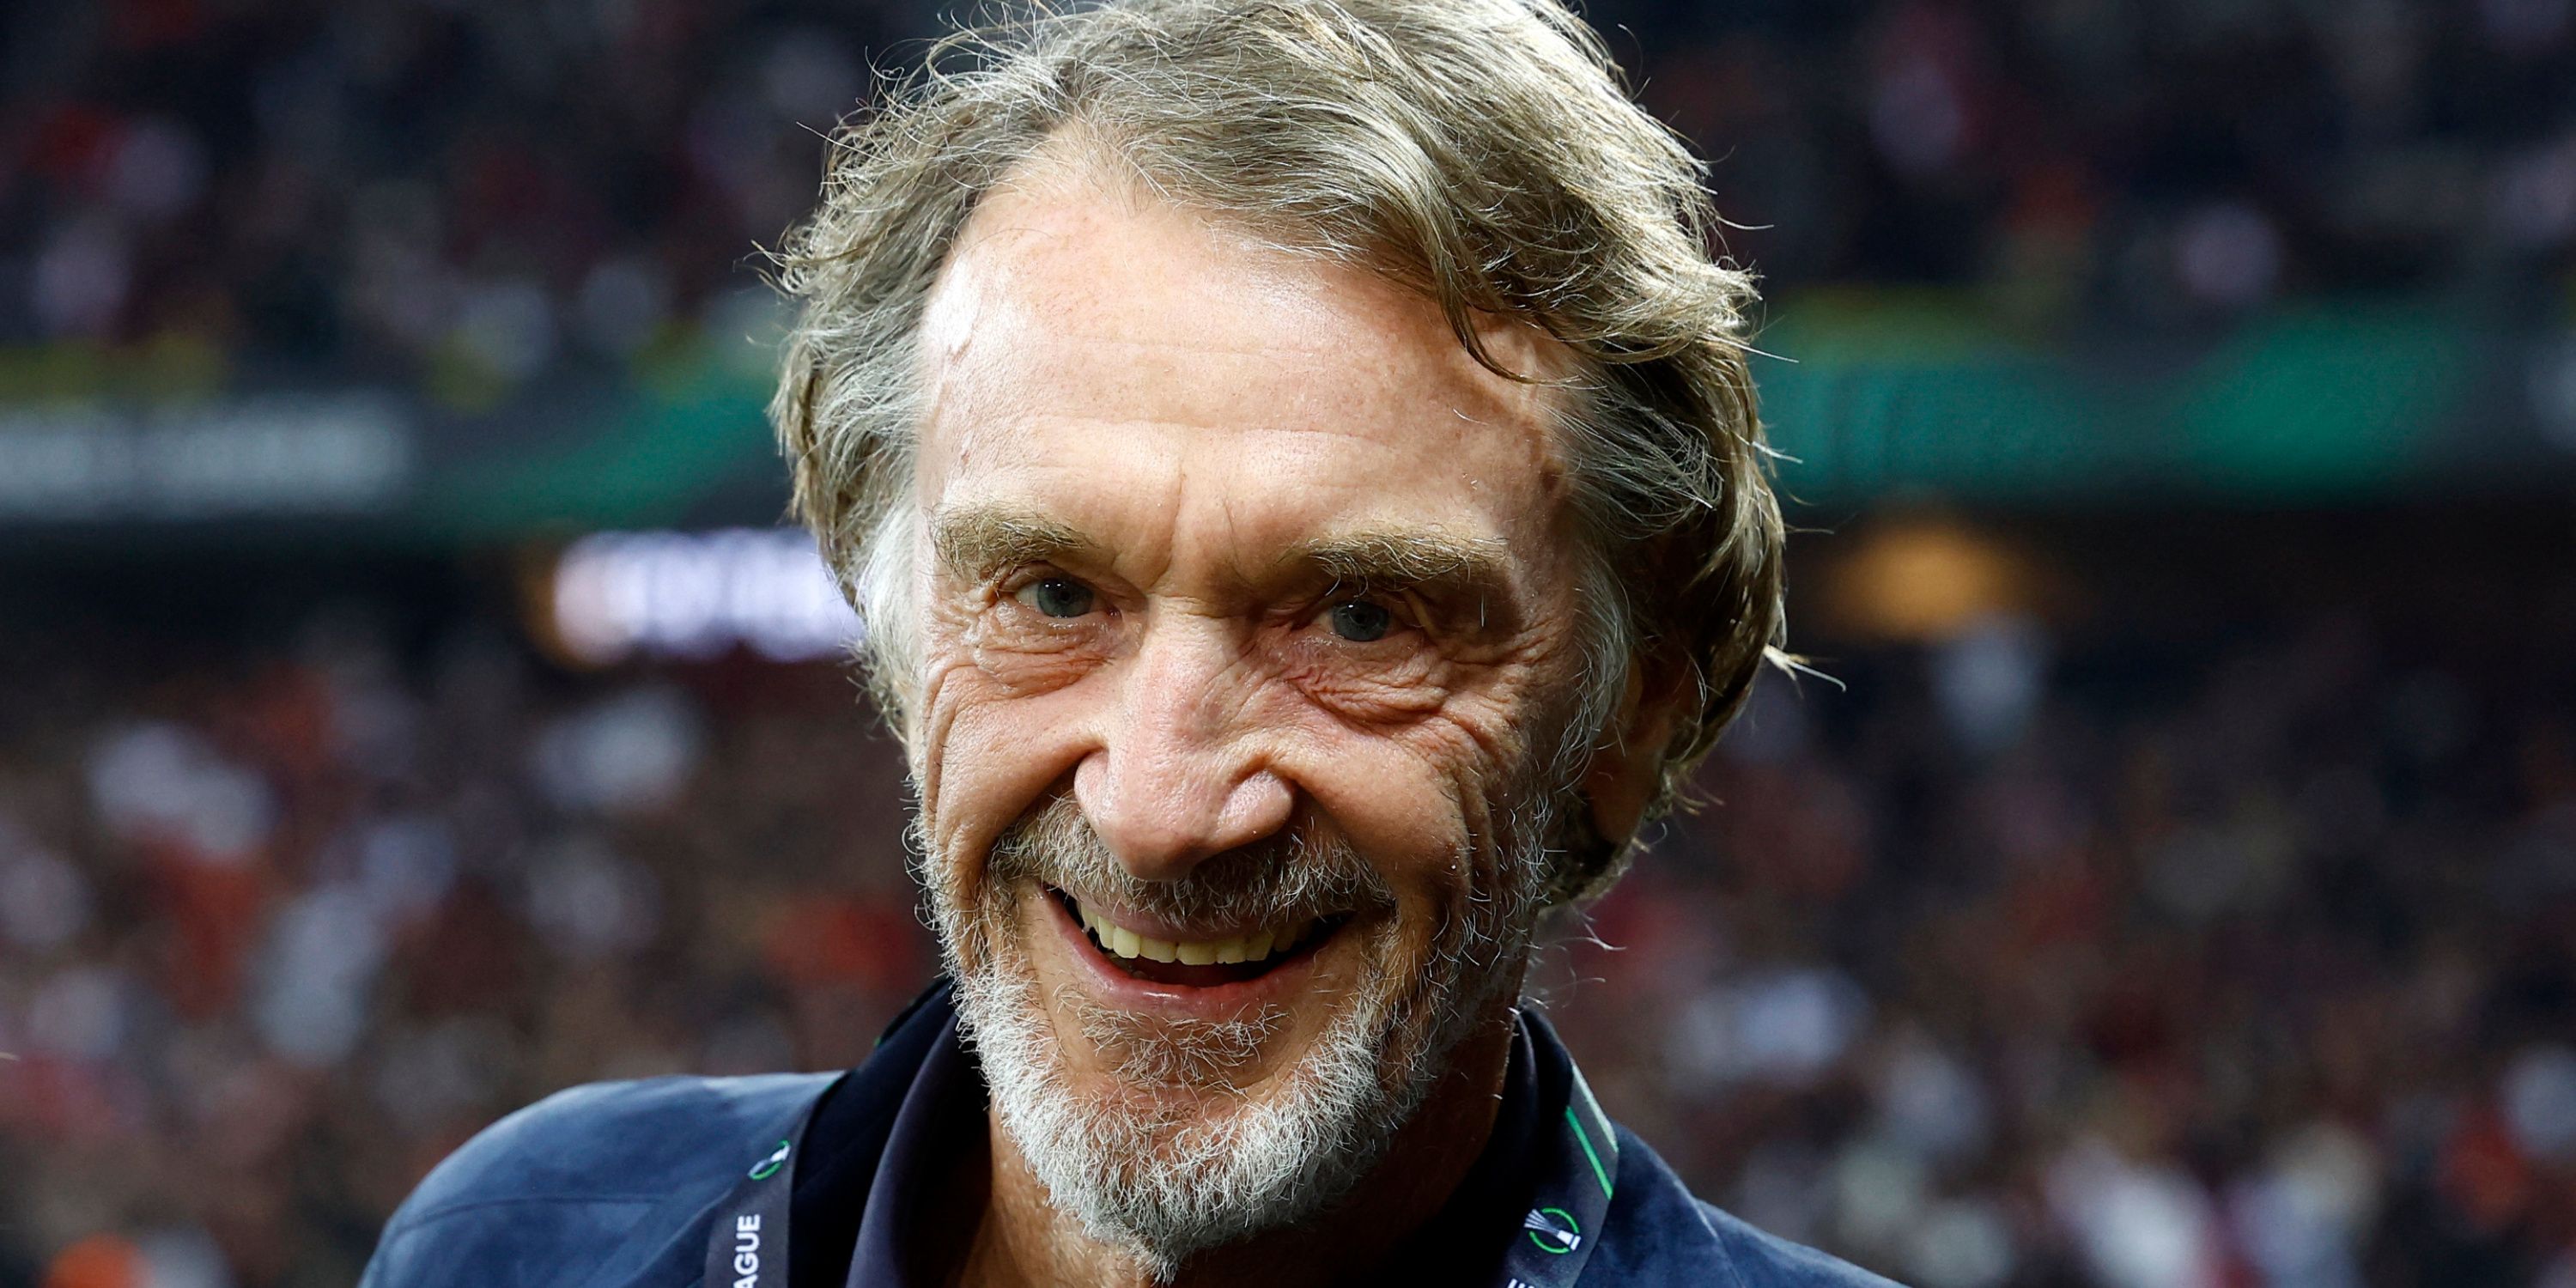 Sir Jim Ratcliffe's Bold Move Shakes Up the Football World